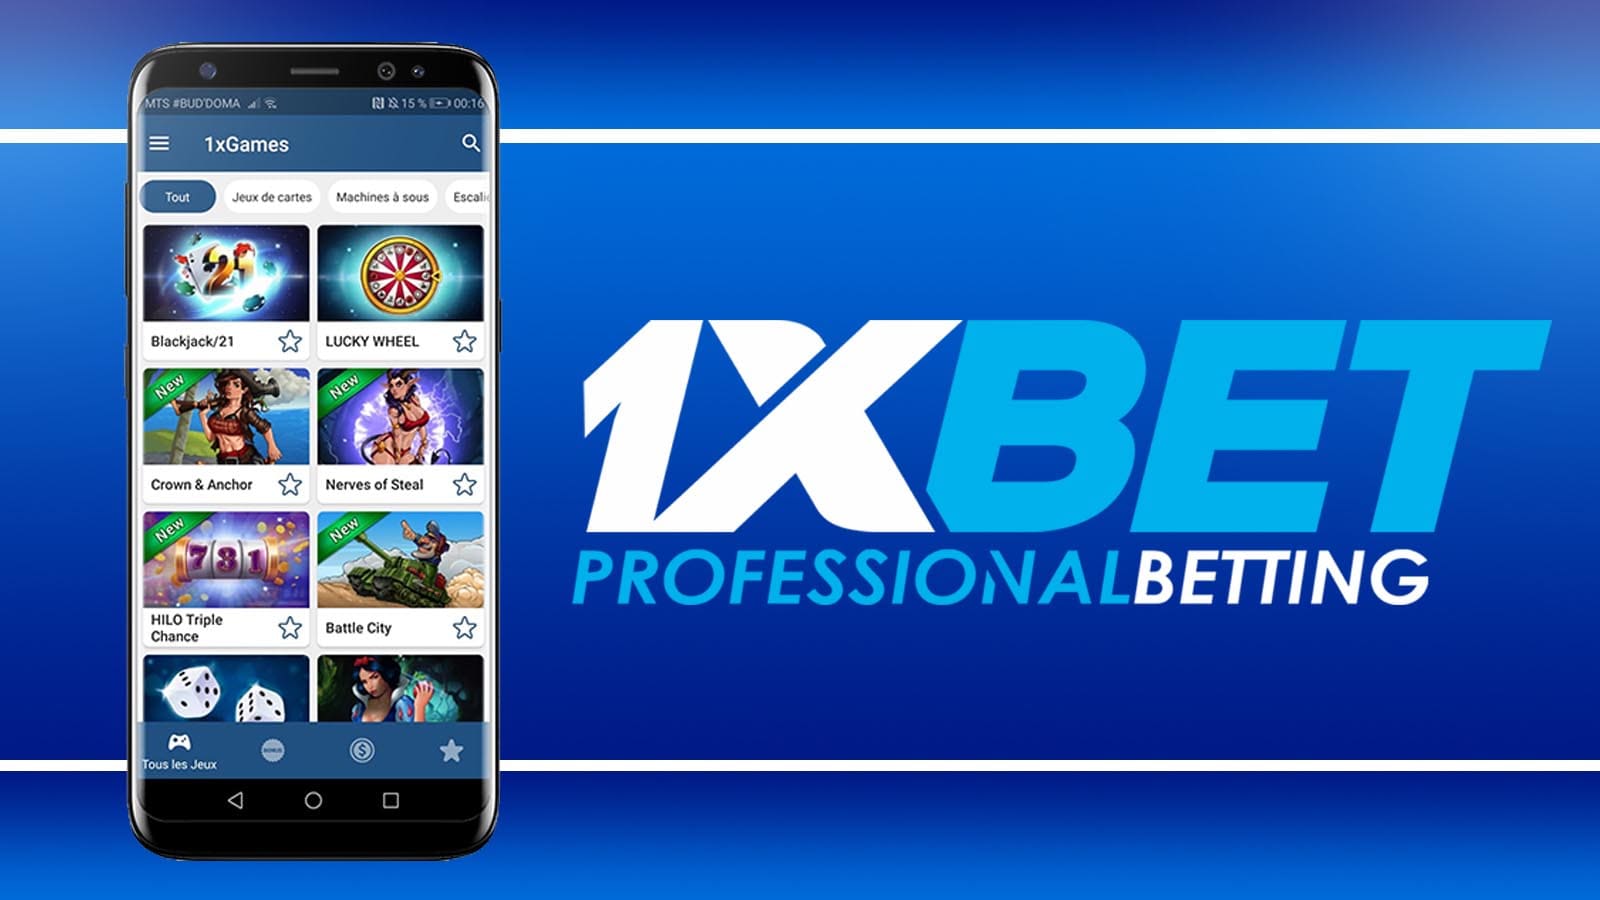 download the 1xBet app for iOS in India